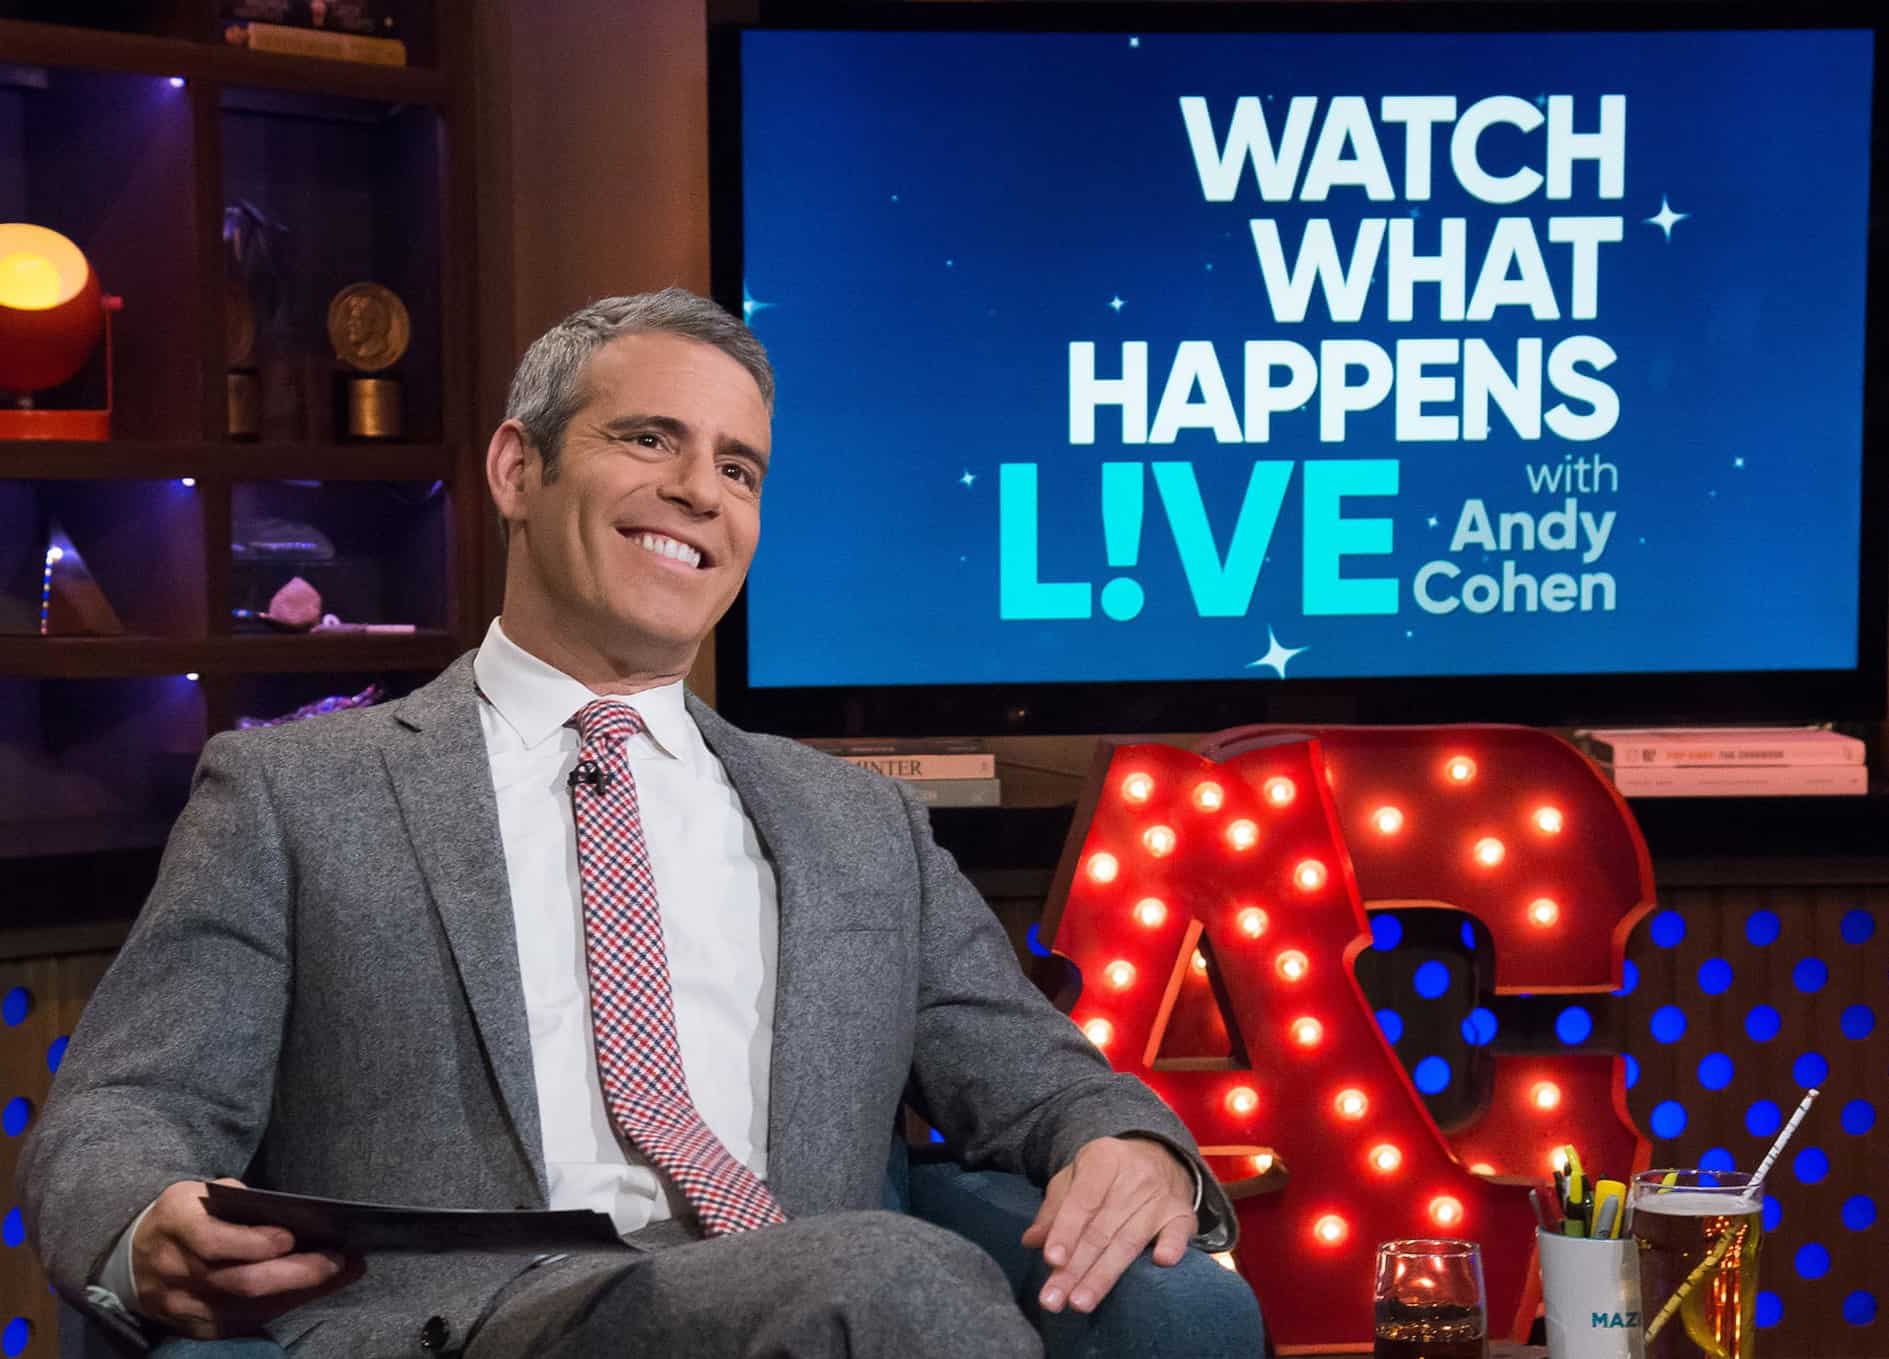 "Watch What Happens Live! with Andy Cohen" is a late-night talk show hosted by Andy Cohen